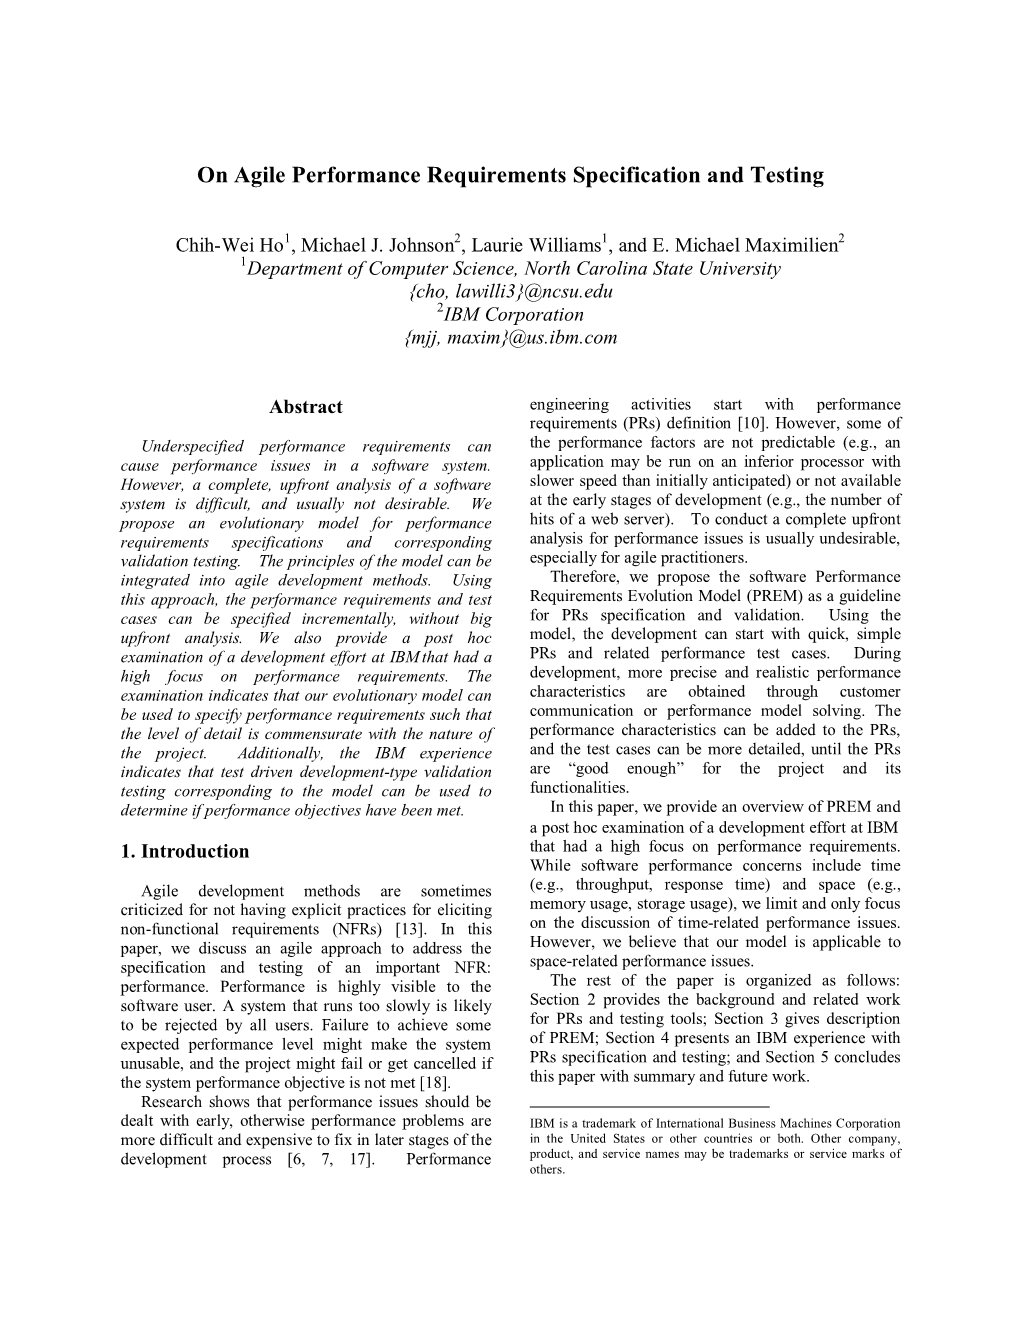 On Agile Performance Requirements Specification and Testing